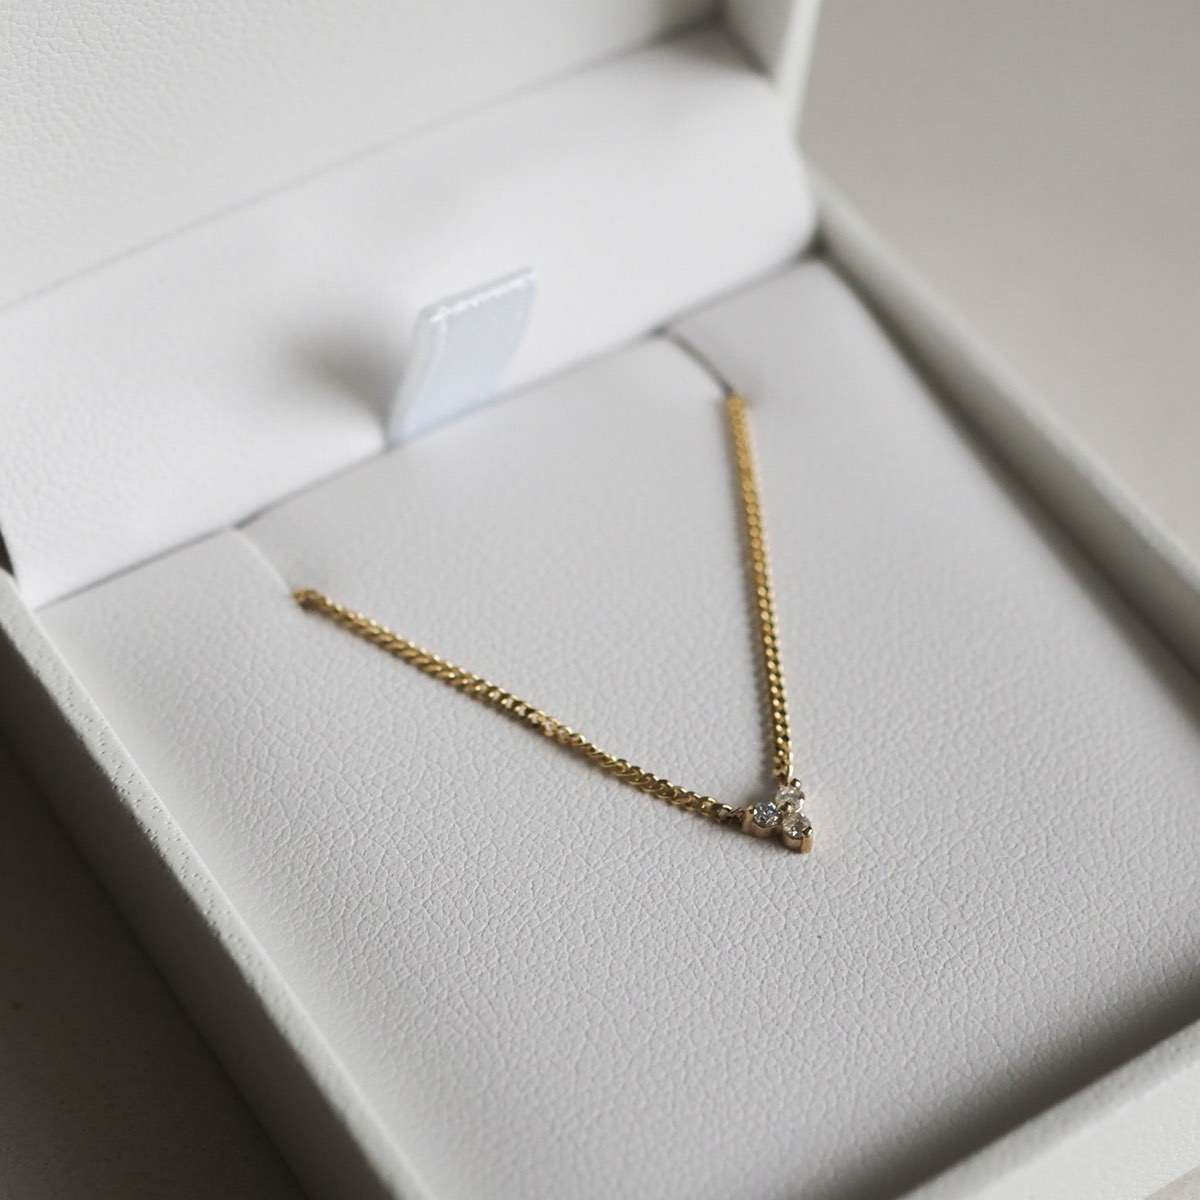 Our Solid Gold Therefore Trio Cluster Necklace laid flat in a Kate & Kole jewellery box